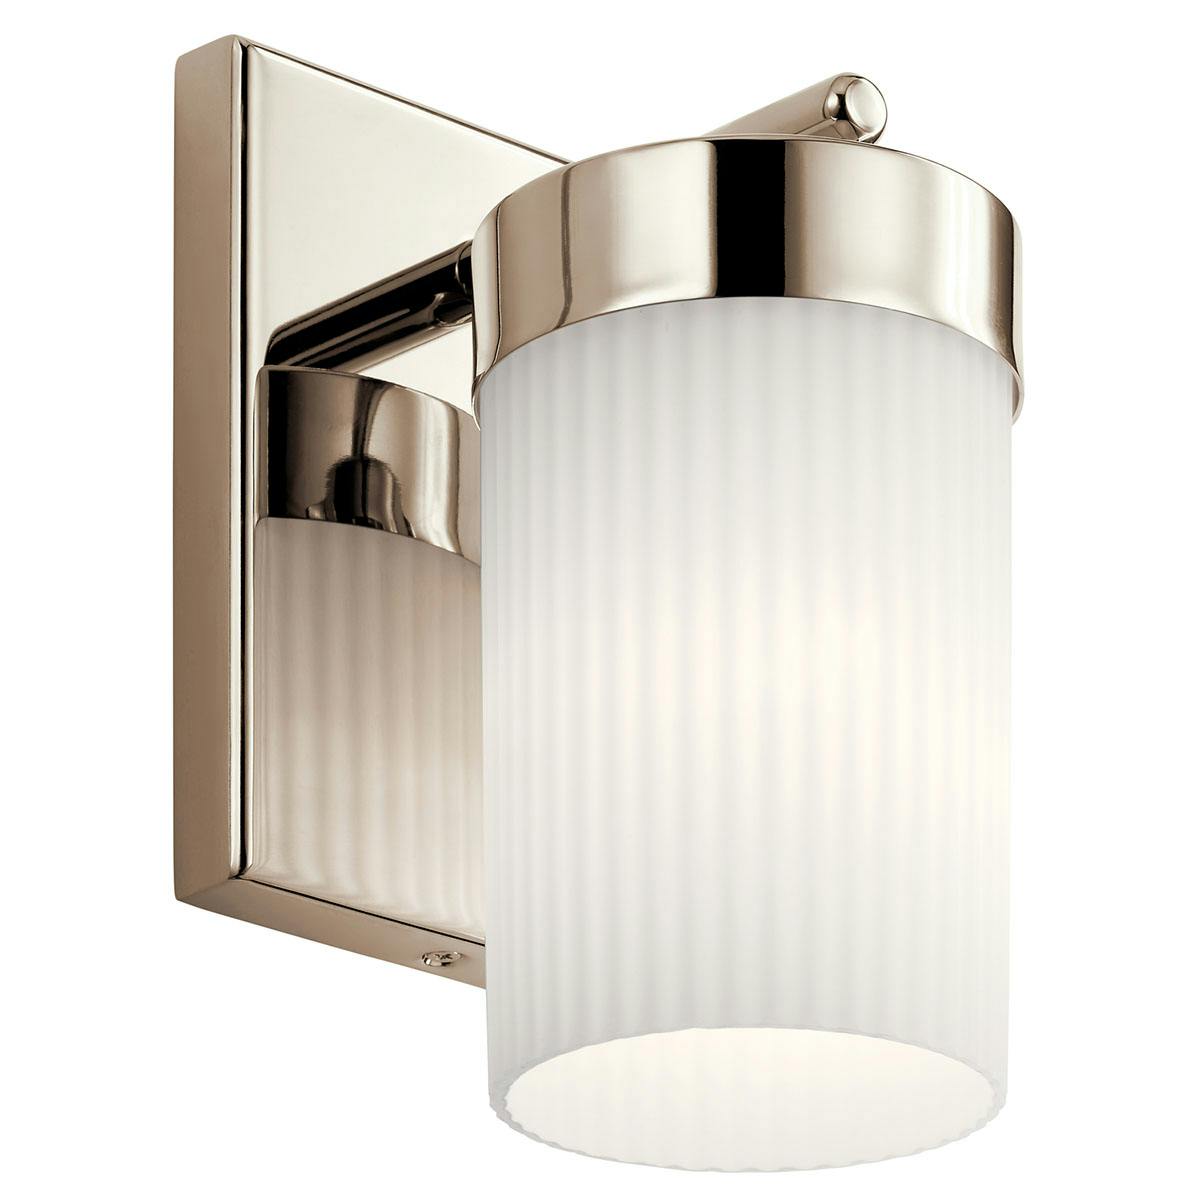 Ciona 9" 1 Light Sconce in Nickel on a white background